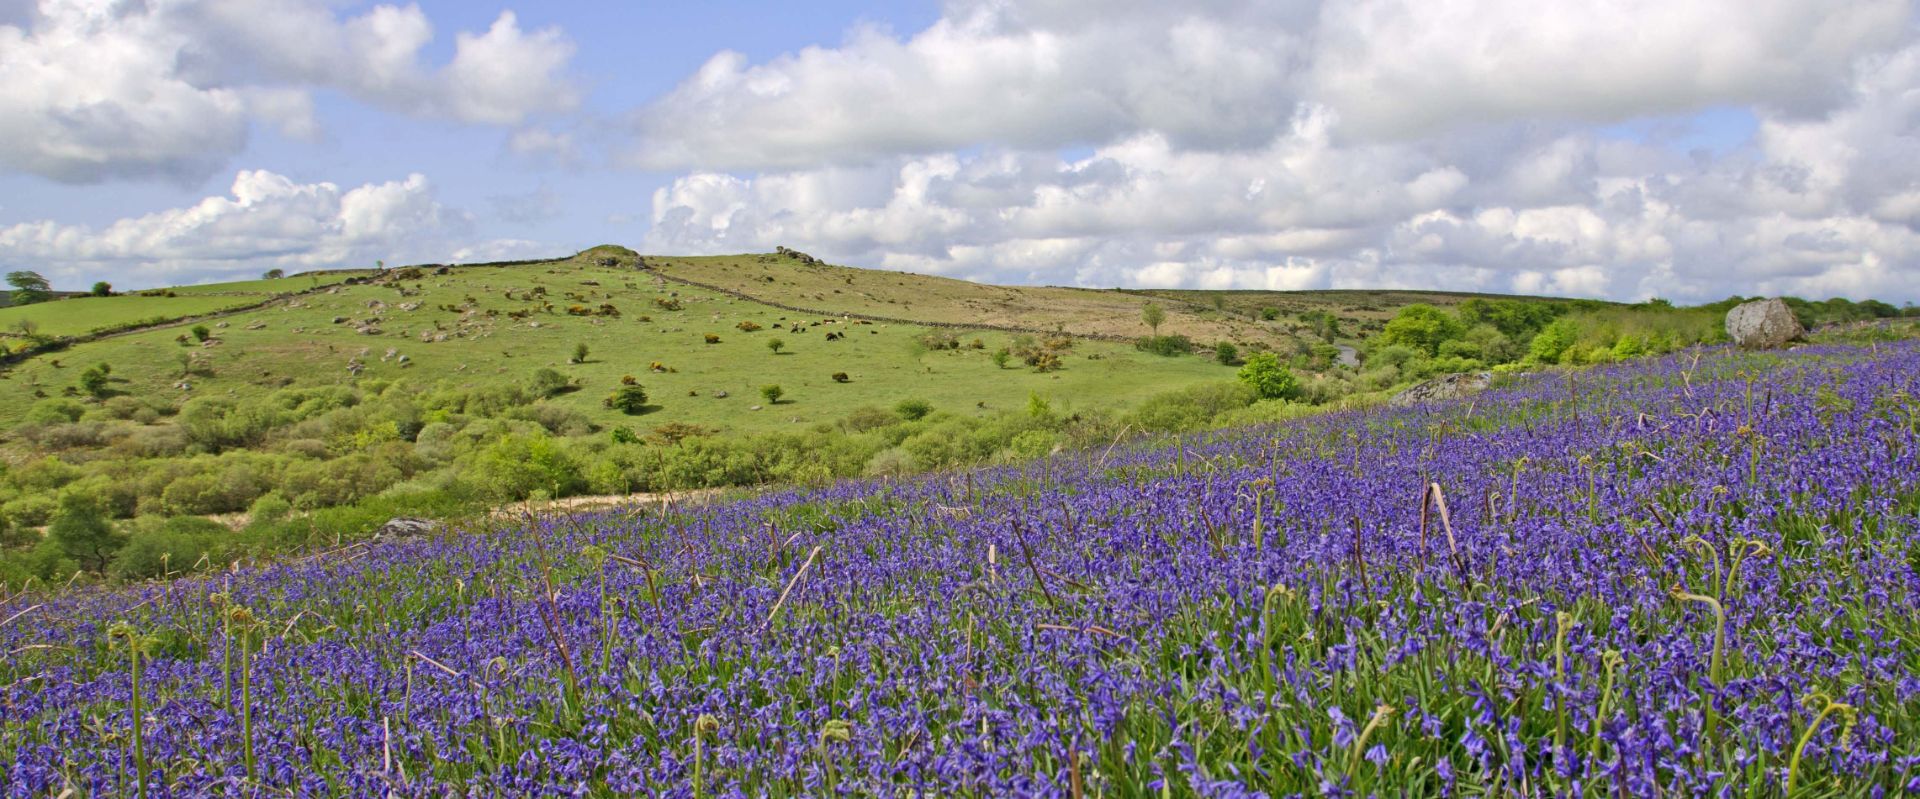 Bluebells at Holwell Lawn on Dartmoor National Park in Devon